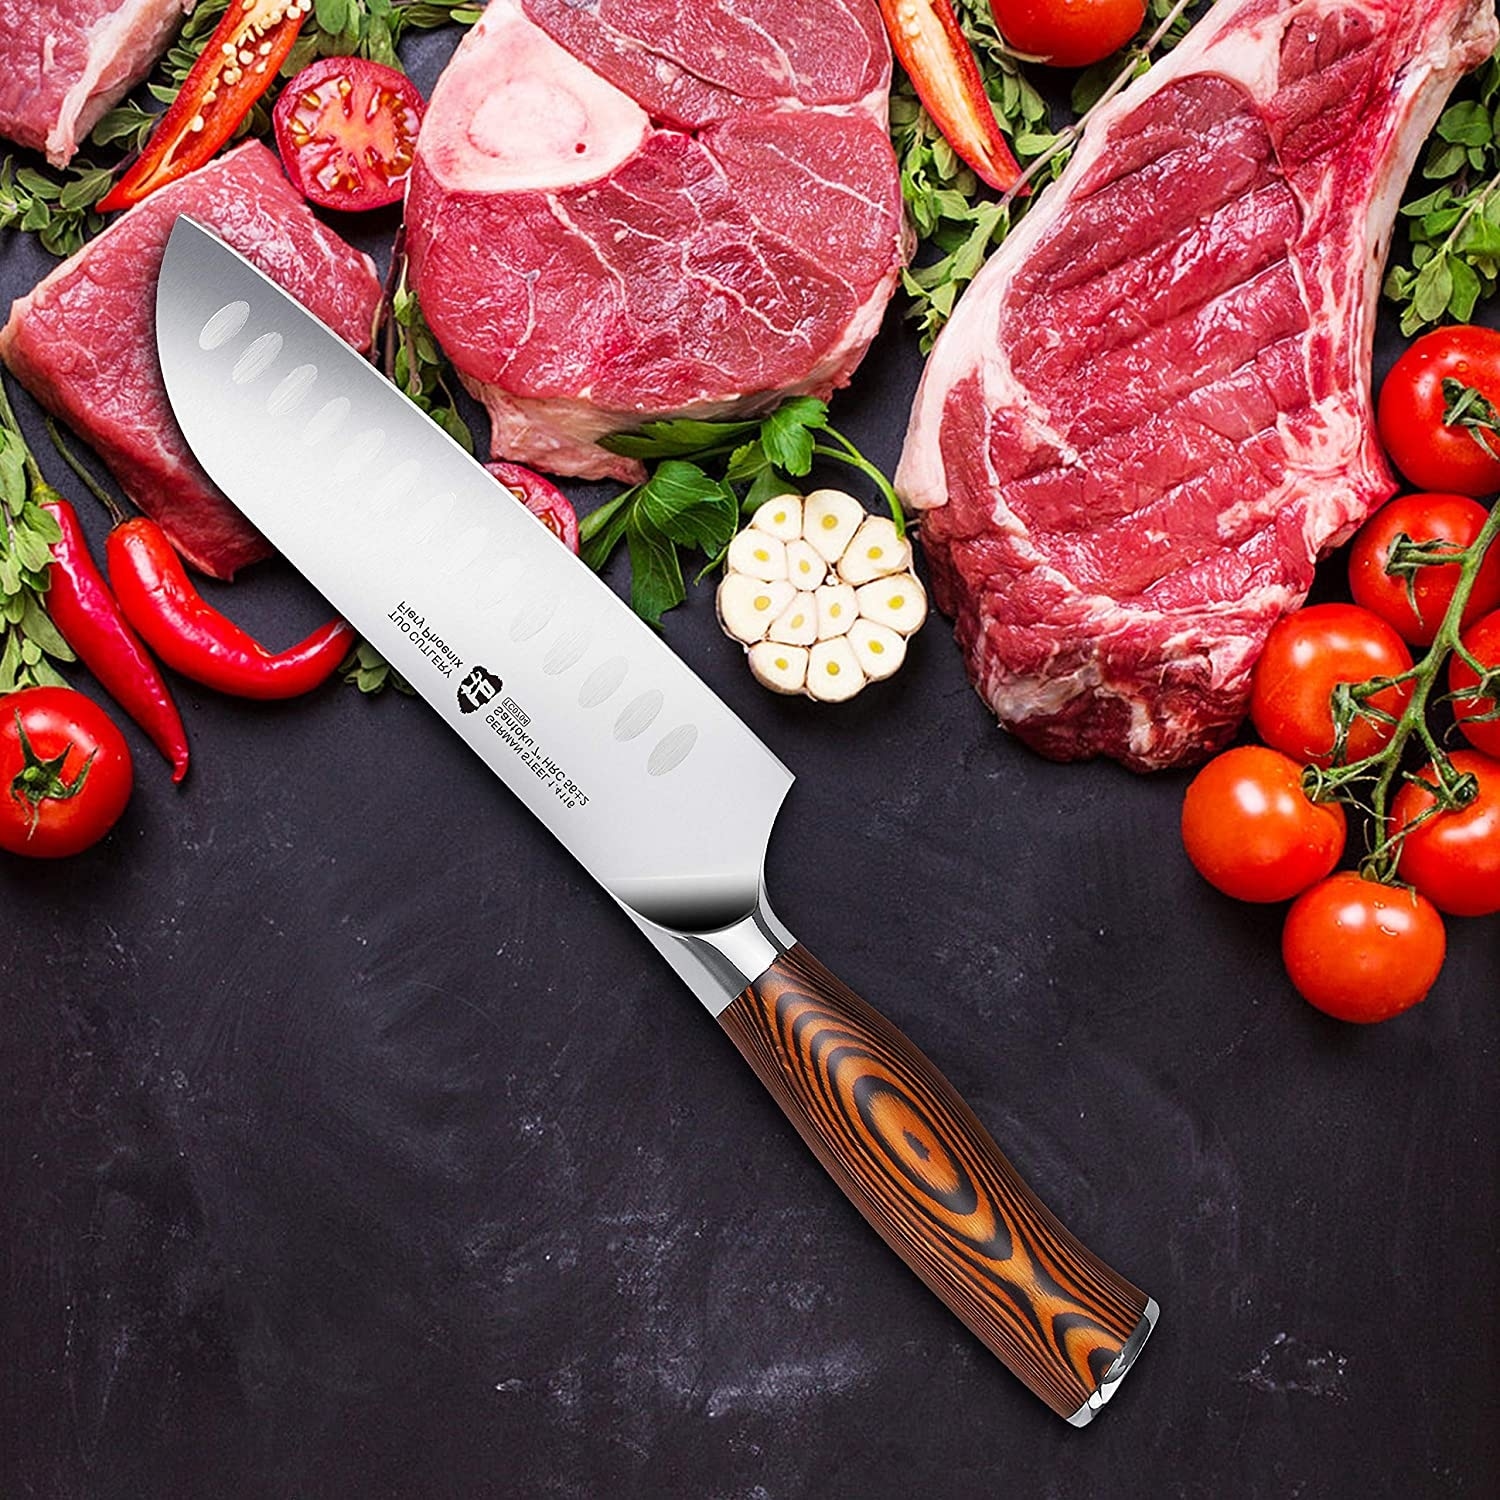 https://ak1.ostkcdn.com/images/products/is/images/direct/1d644f548100a6f47f2bbe7d8220e78c4c163d14/Tuo-Cutlery-7%22-Santoku-Vegetable-Knife%2C-Fiery-Series.jpg